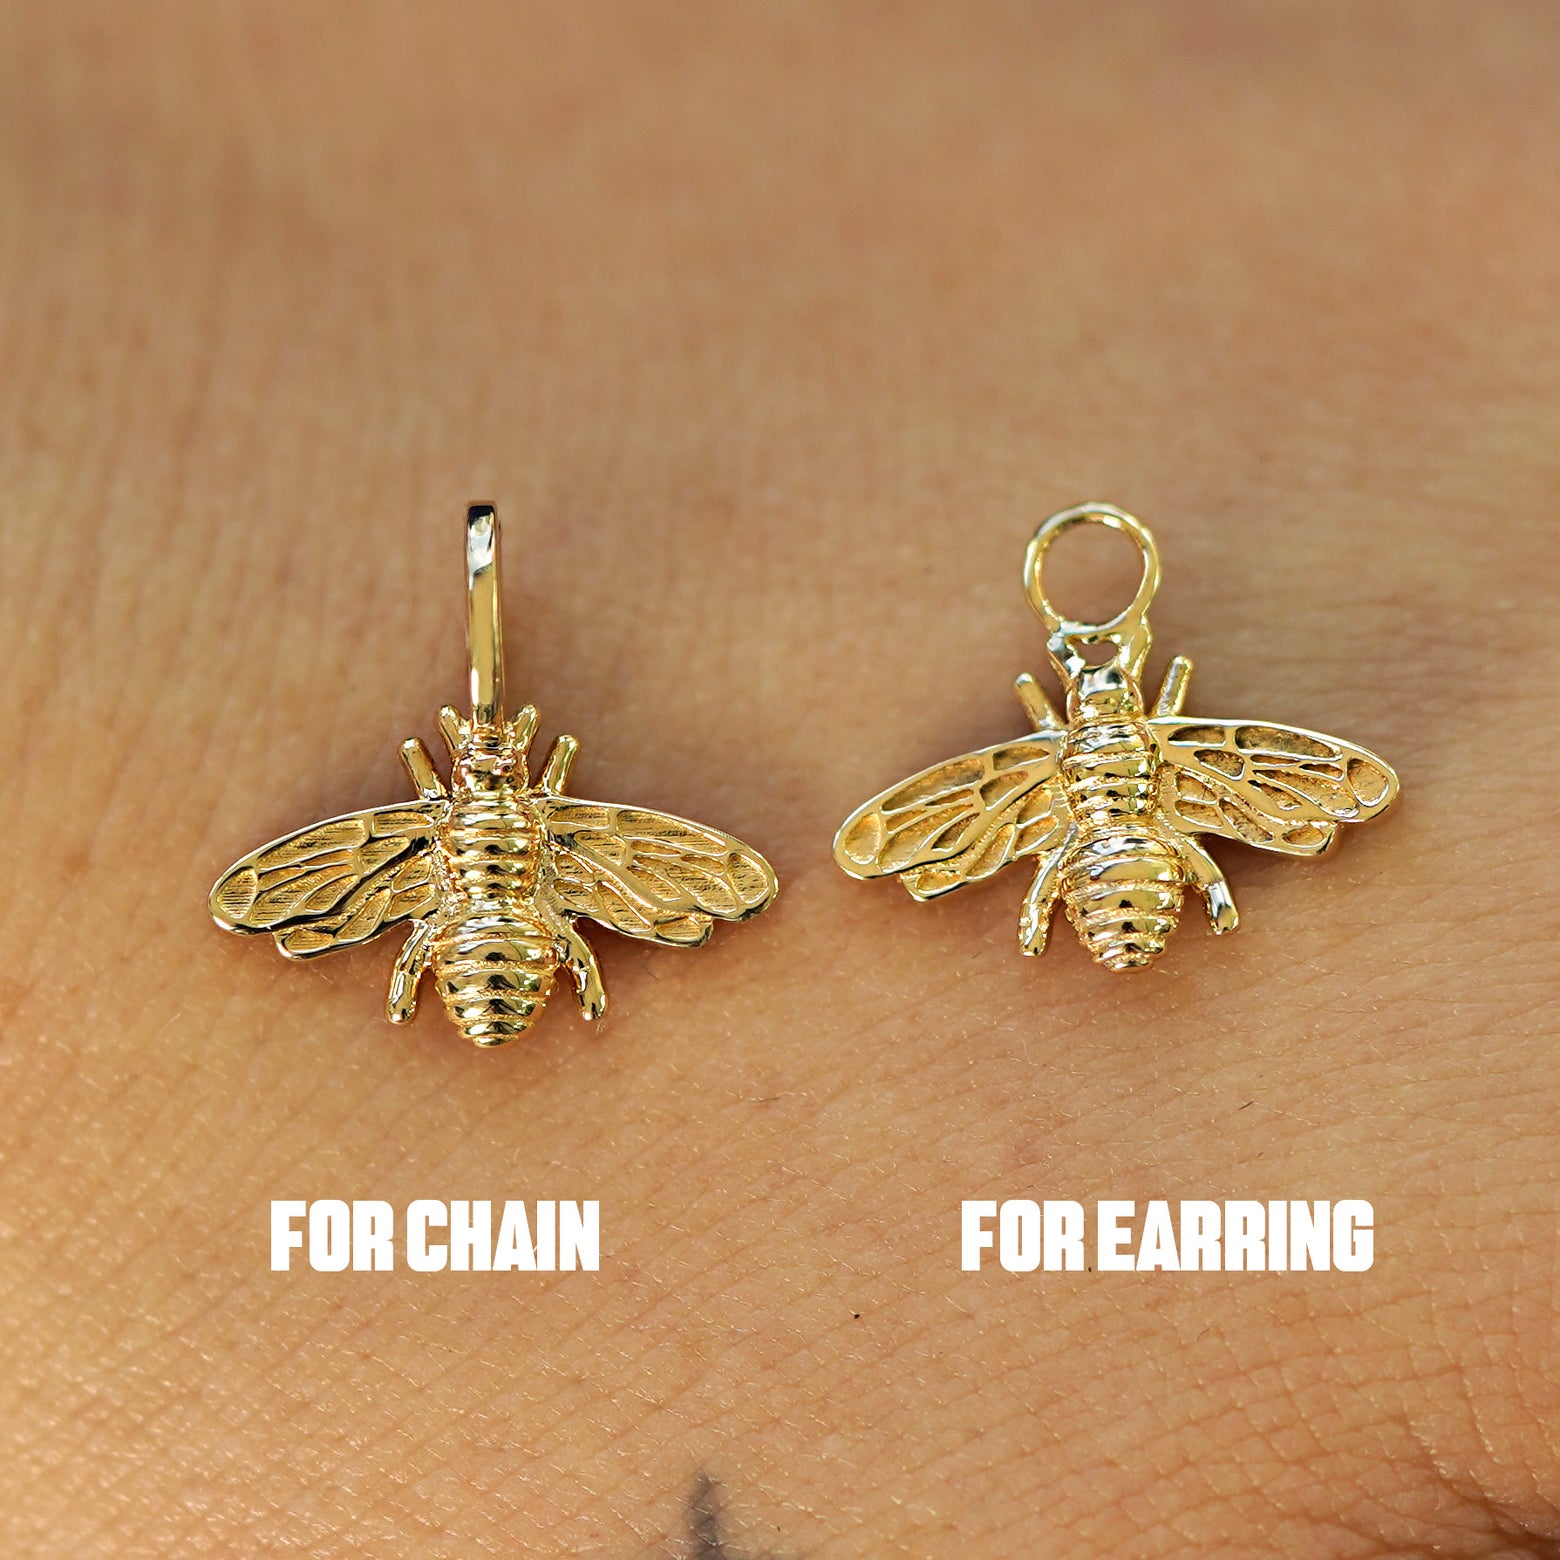 Two 14 karat solid gold Bee Charms shown in the For Chain and For Earring options